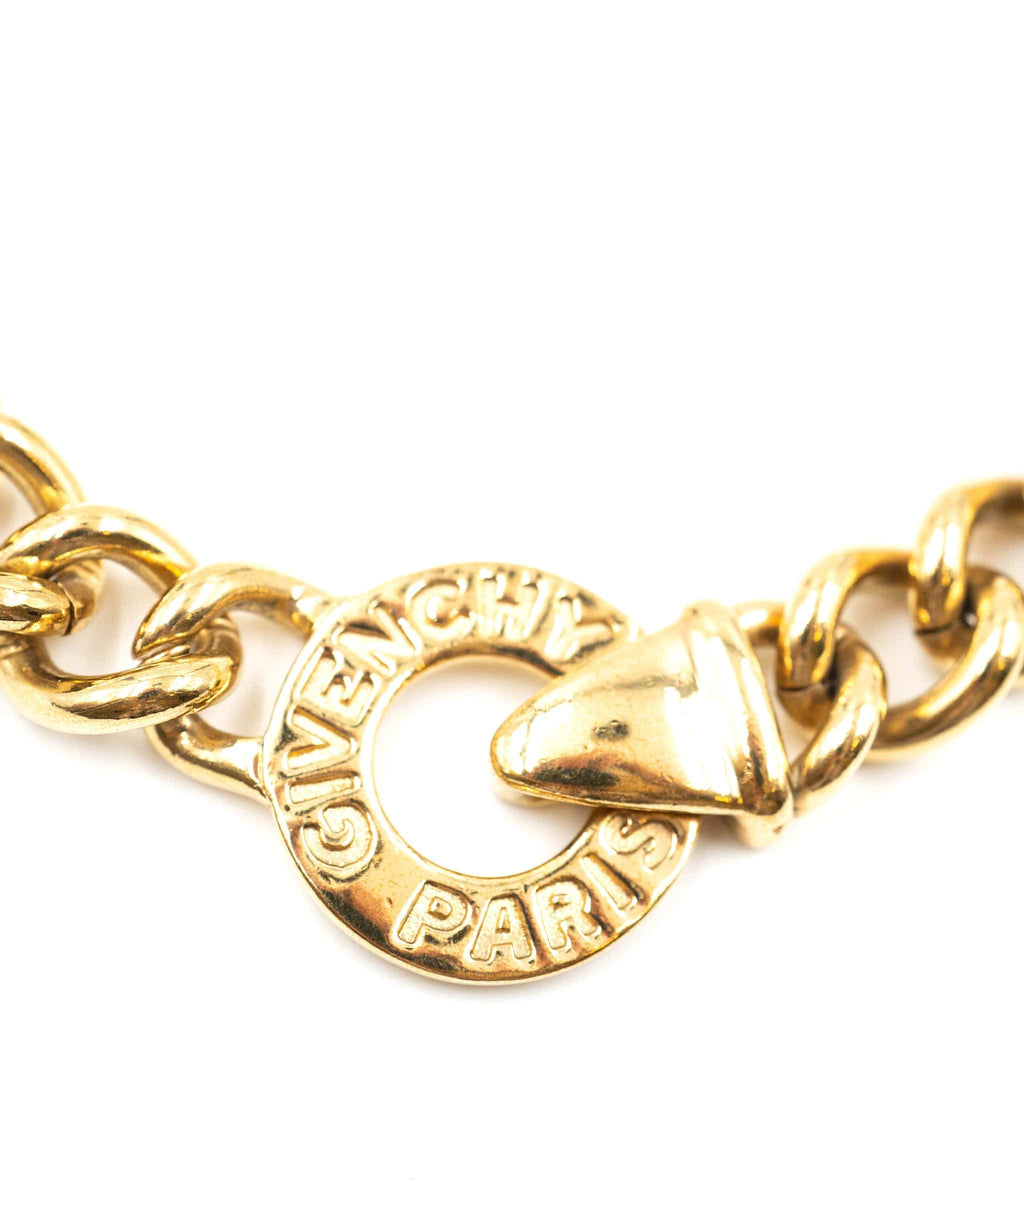 chain Givenchy necklace Givenchy vintage ey – with Paris chunky hook LuxuryPromise and